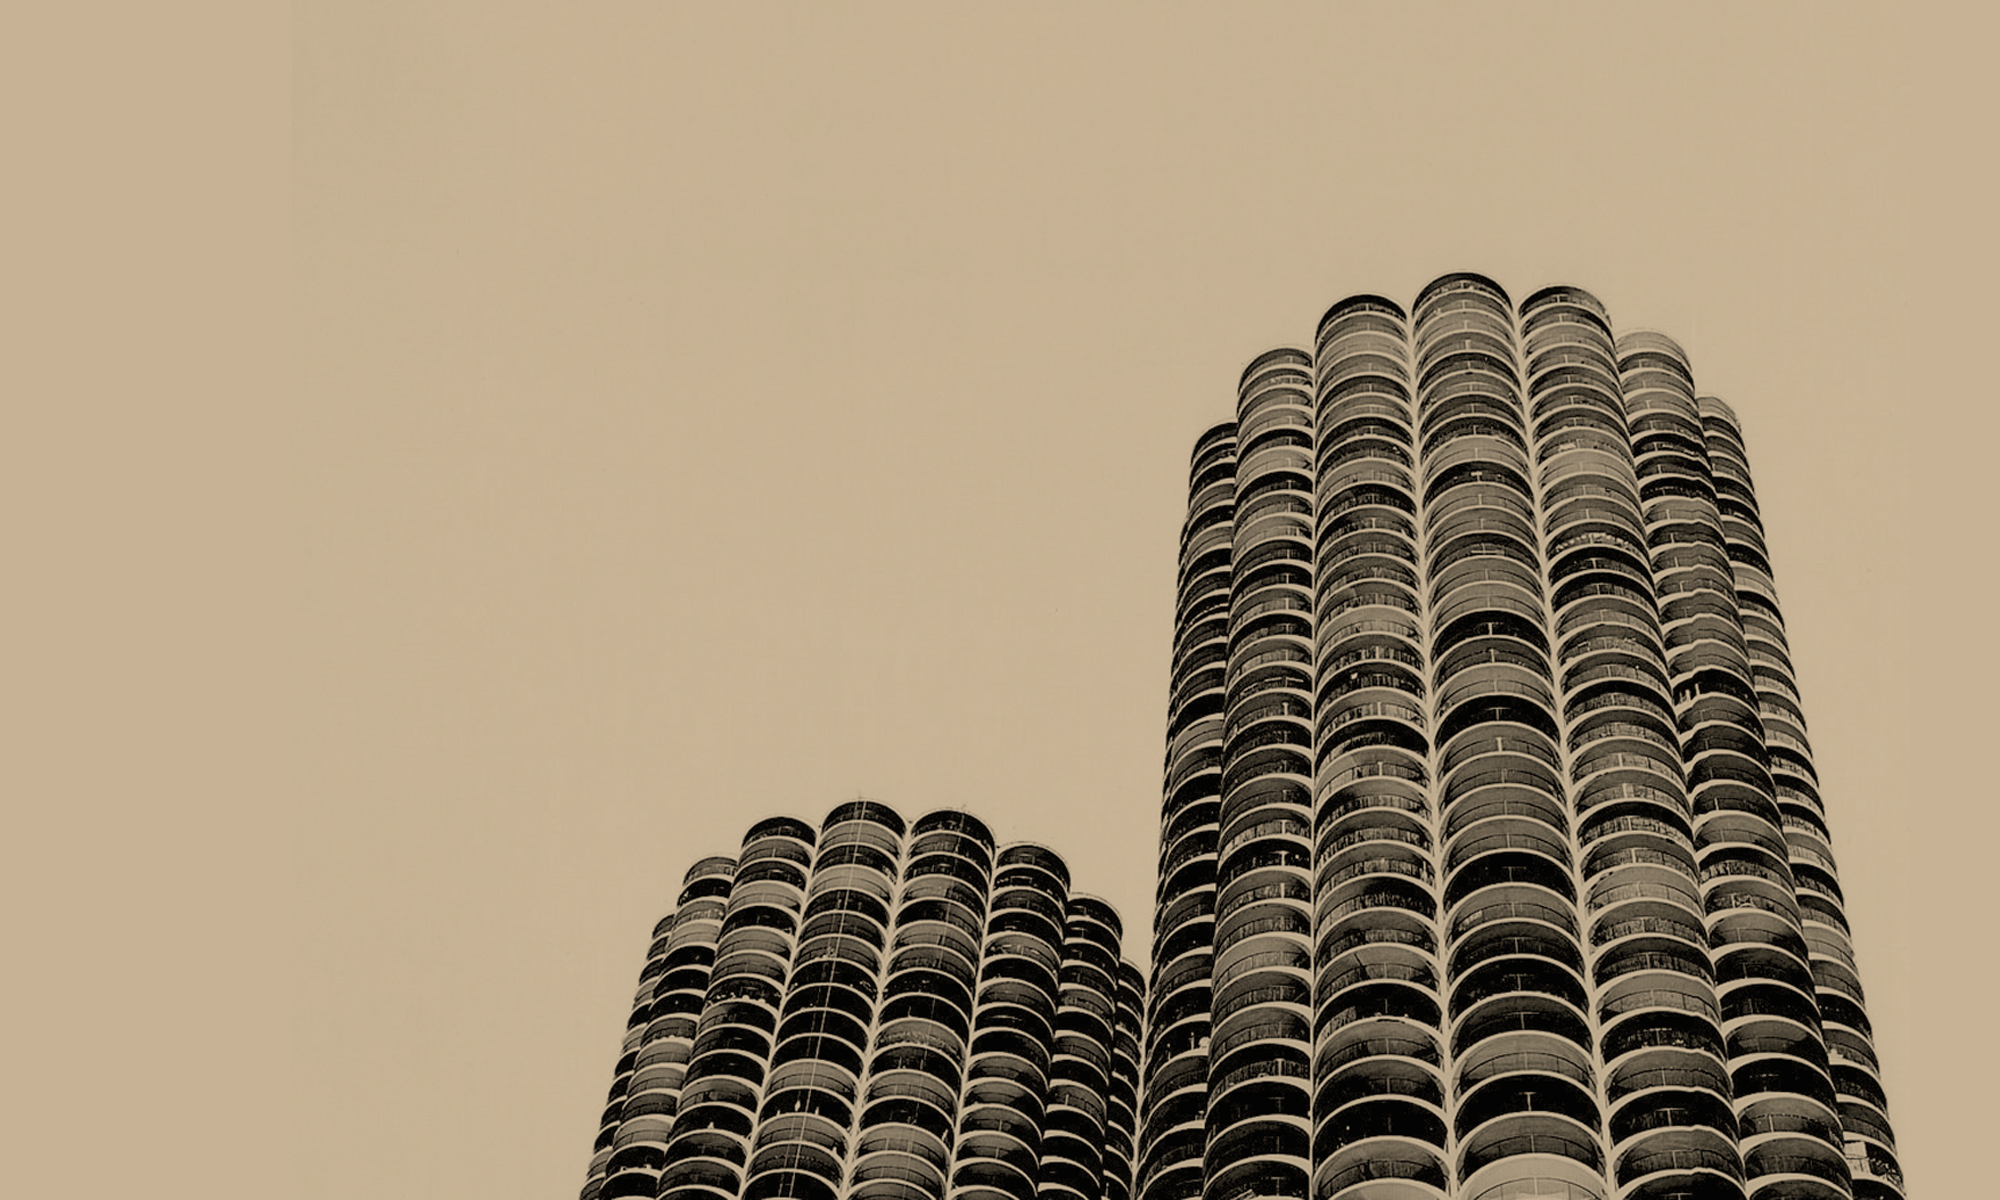 The Wilco Towers How ‘Yankee Hotel Foxtrot’ Redefined the Chicago